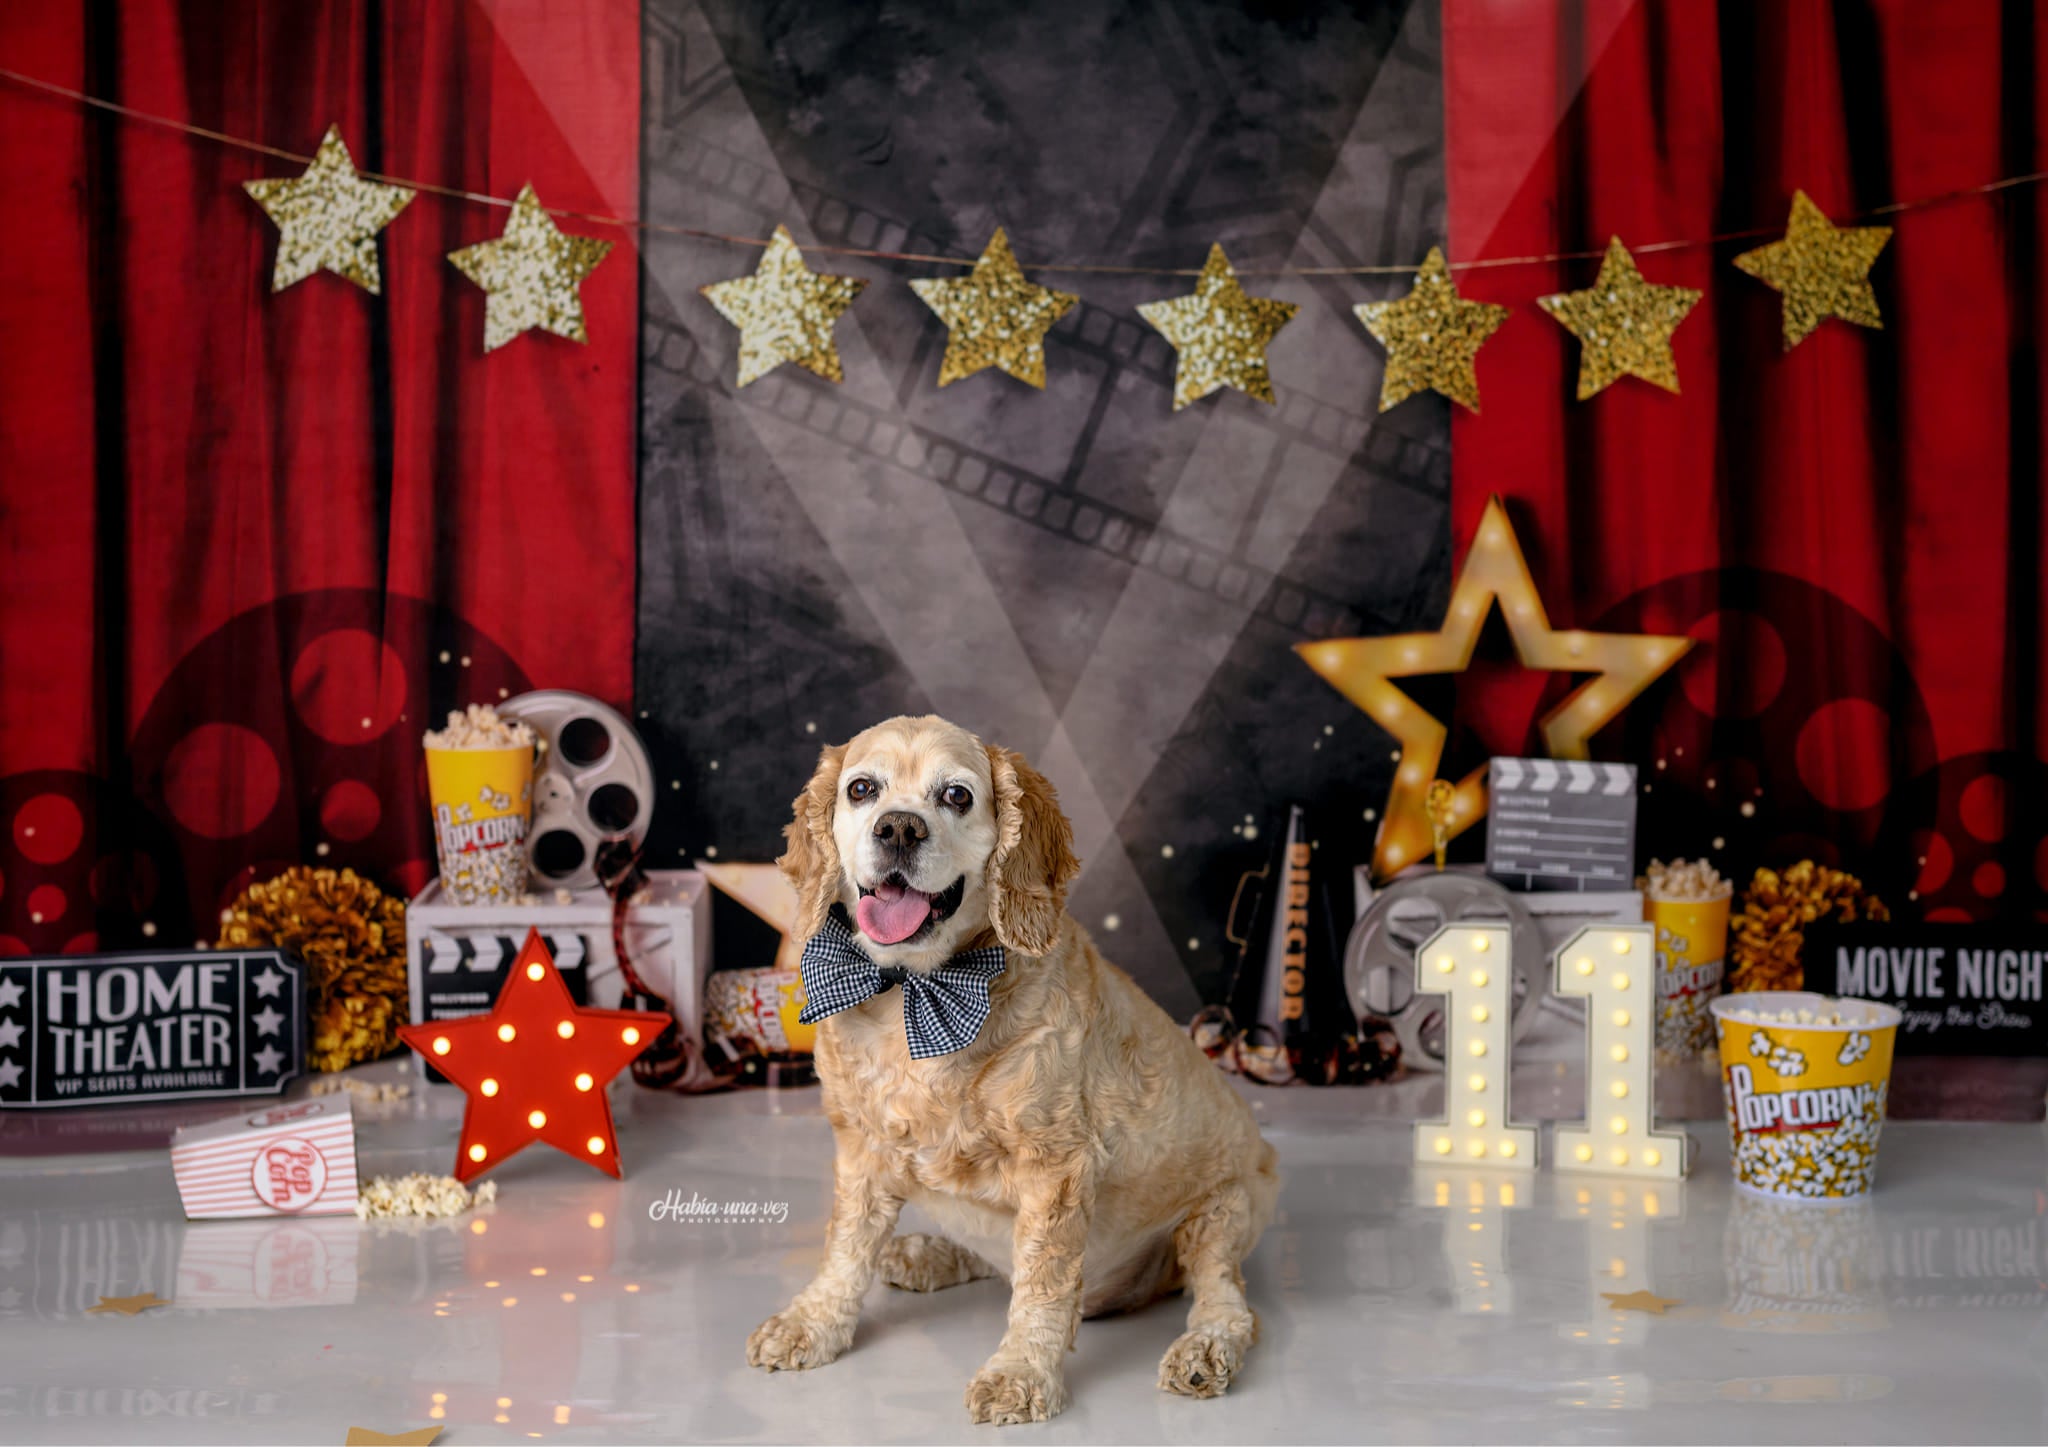 Kate Movie Night Backdrop Red Curtain Designed by Mandy Ringe Photography